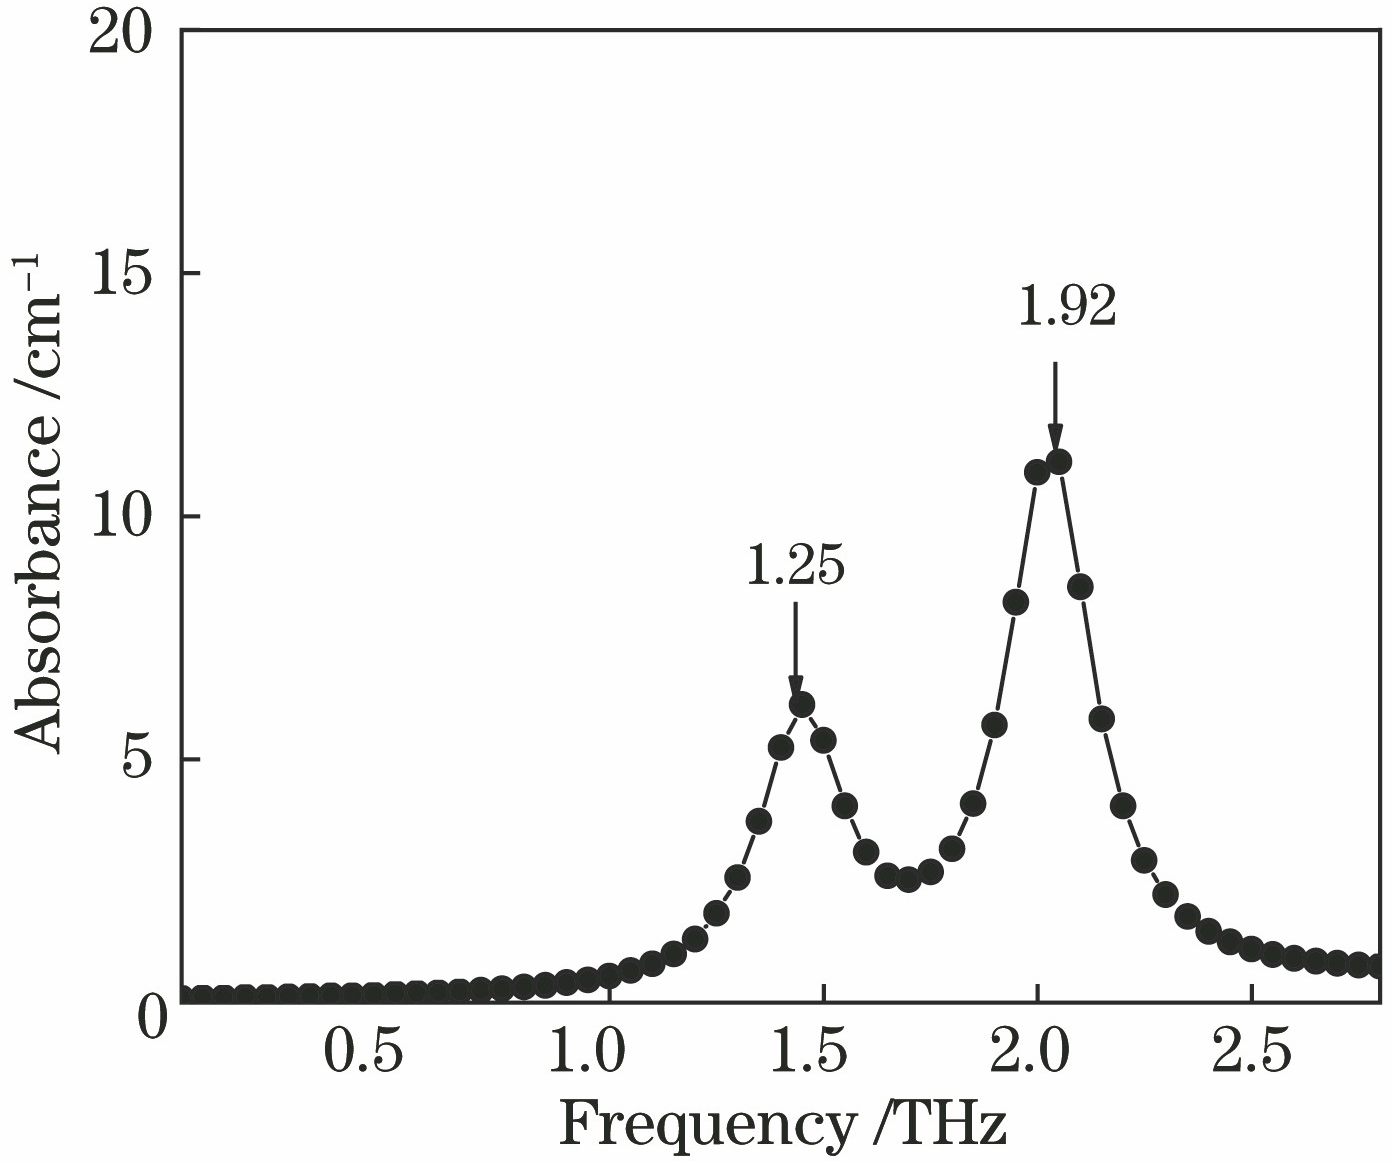 THz characteristic absorption spectrum of homocysteine calculated by DFT